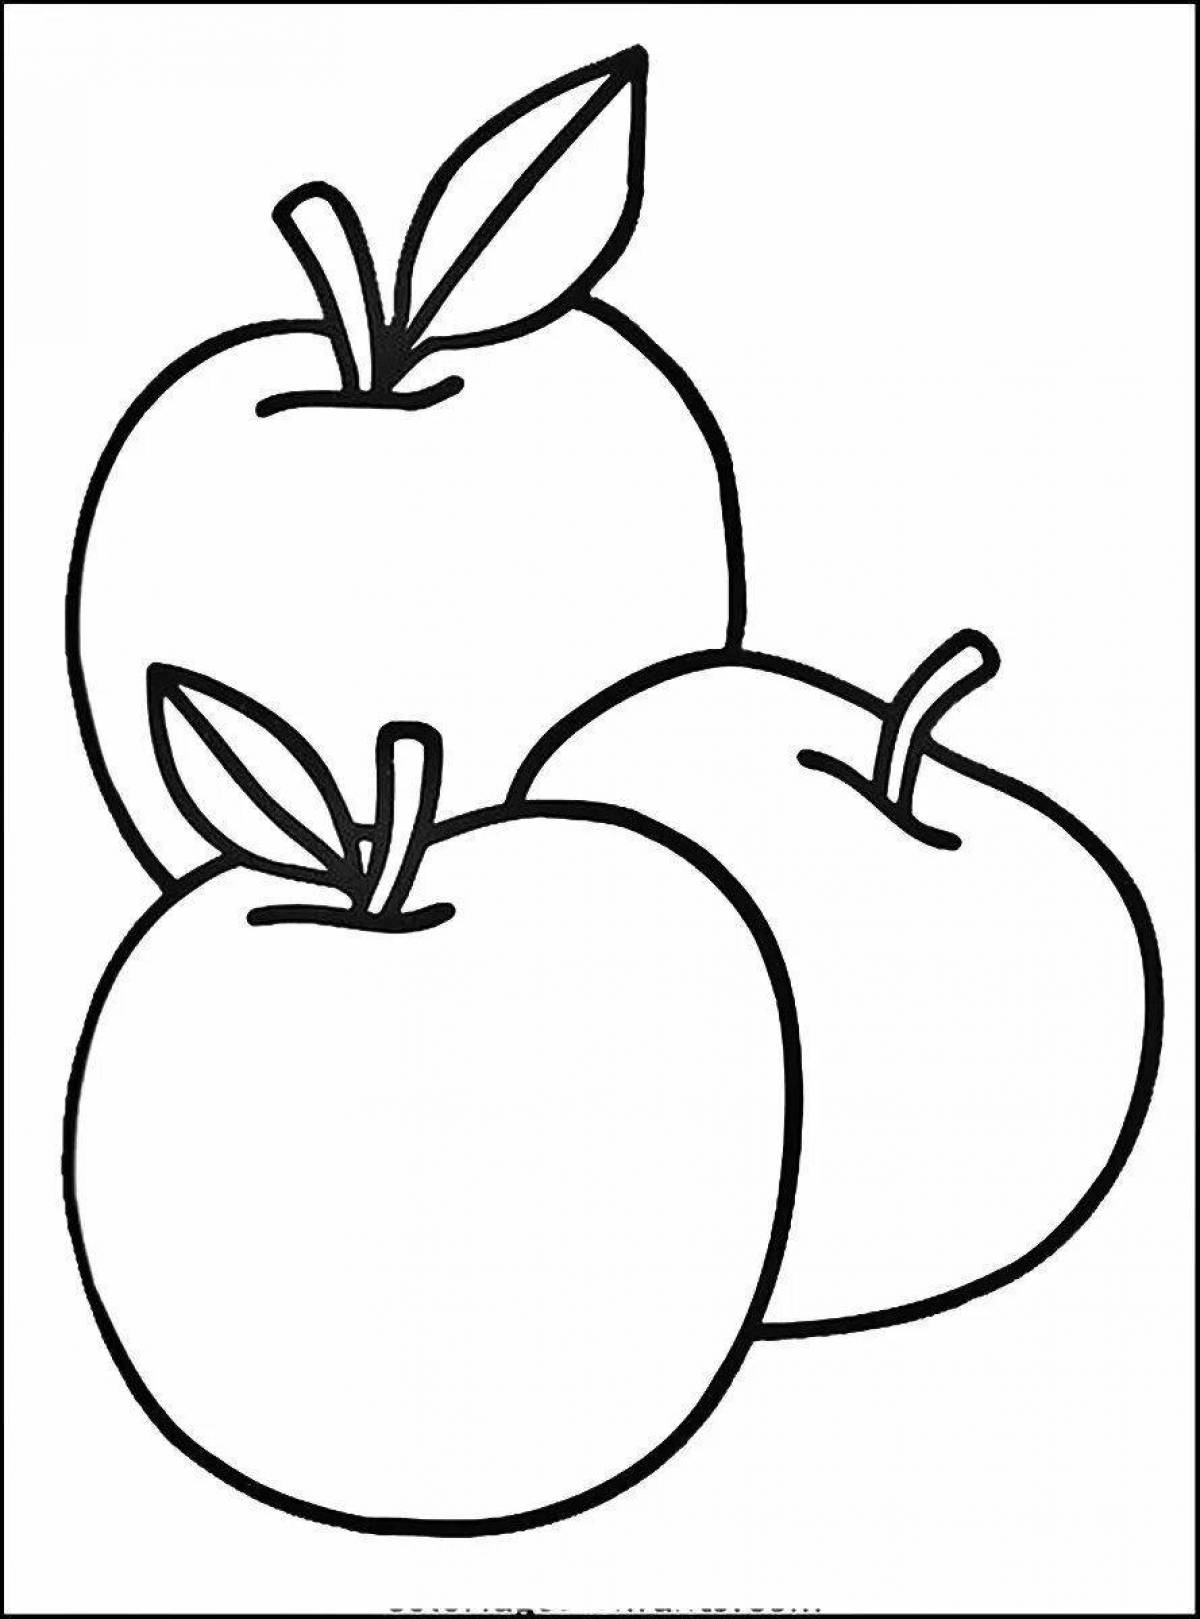 Creative drawing of apples for kids